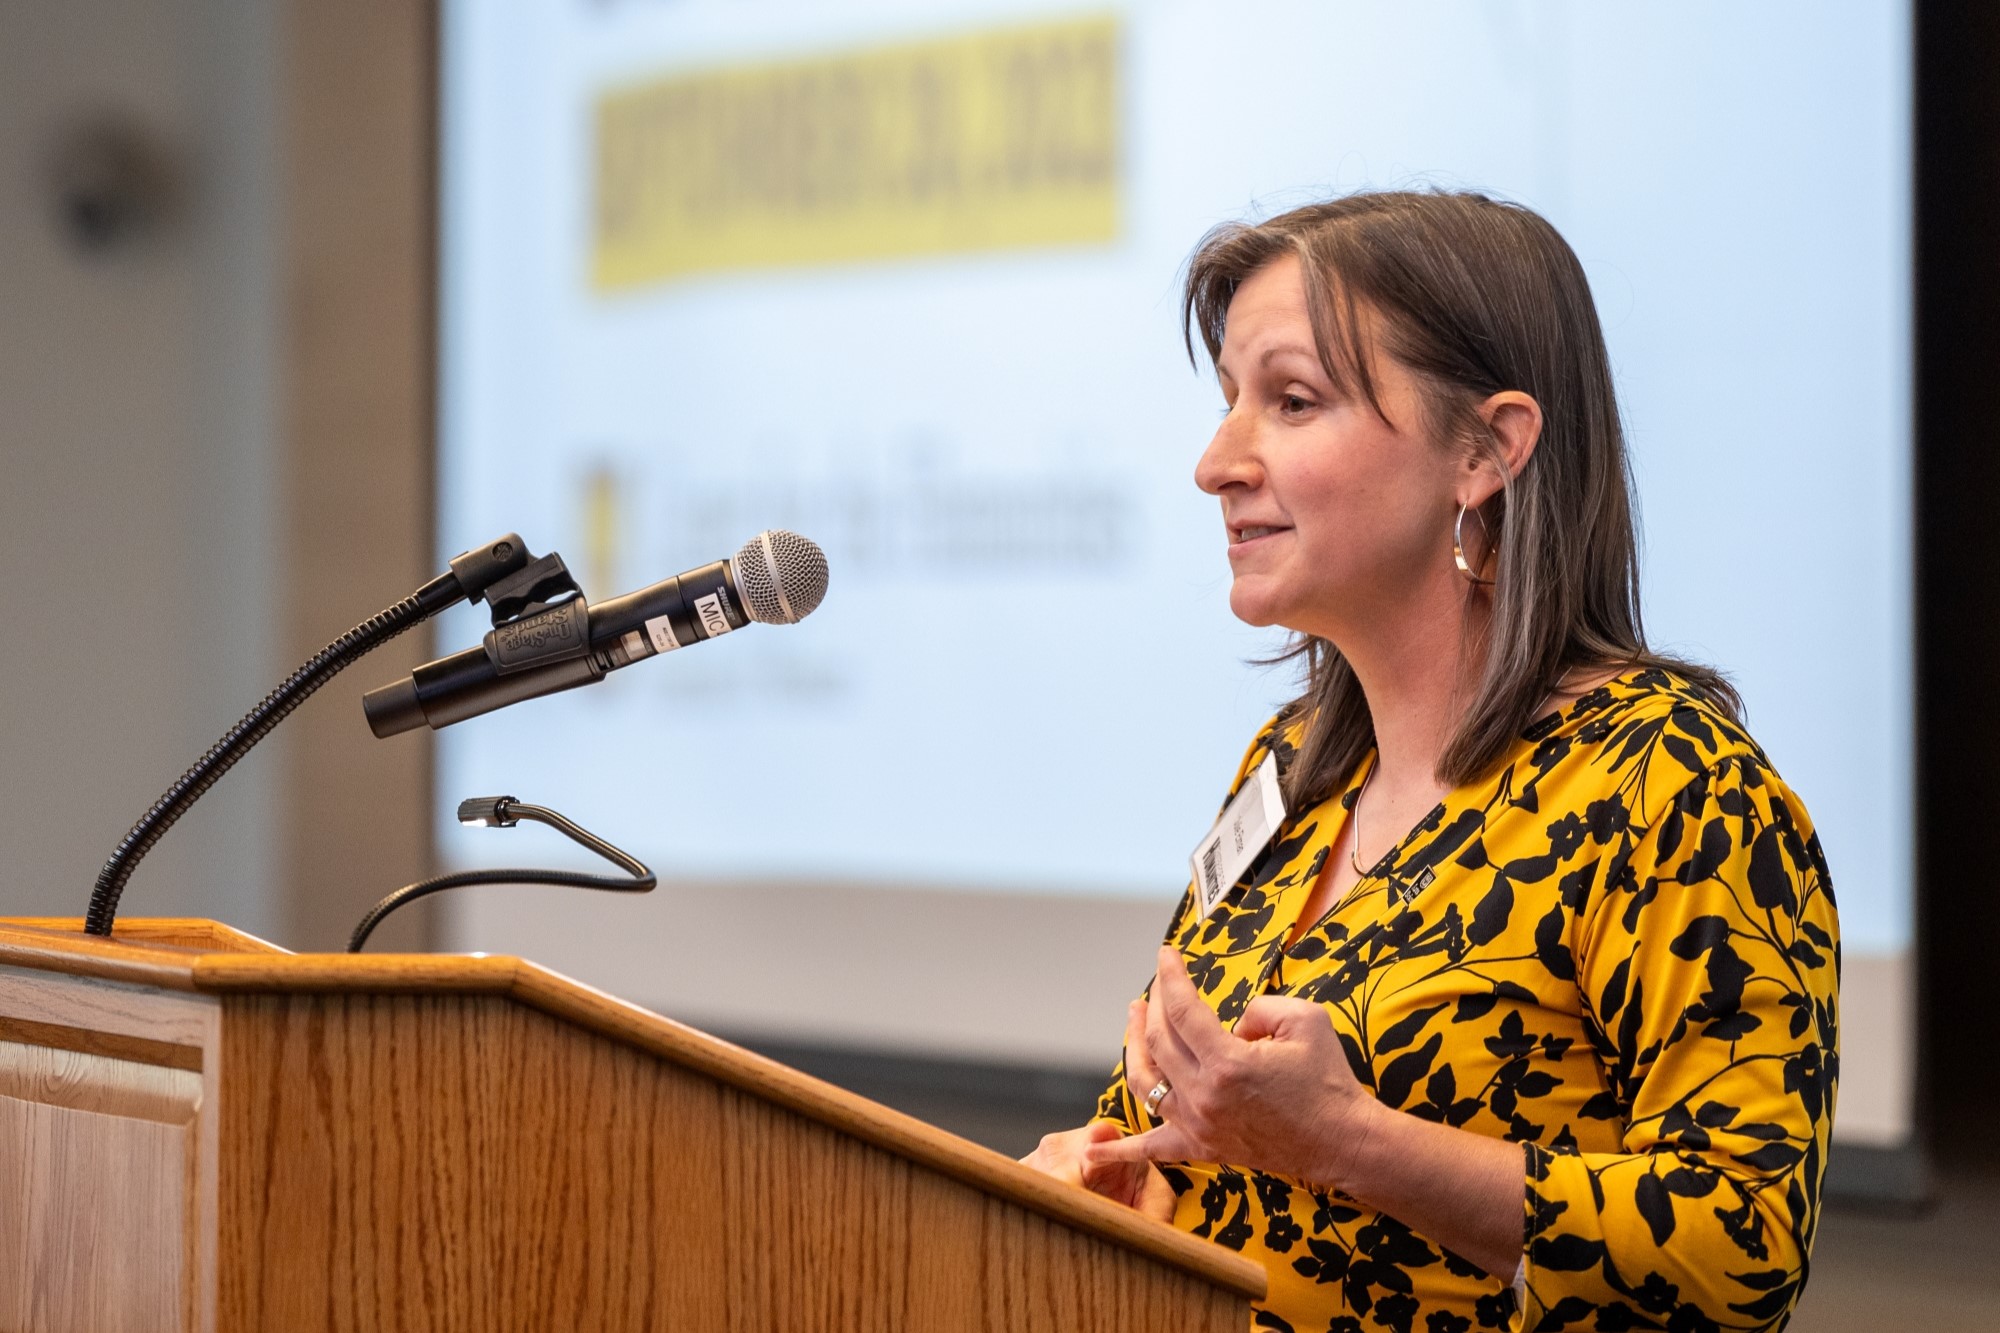 Julie Passanante Elman, director of the Center for the Humanities, addresses the audience during the center's launch at the State Historical Society of Missouri.